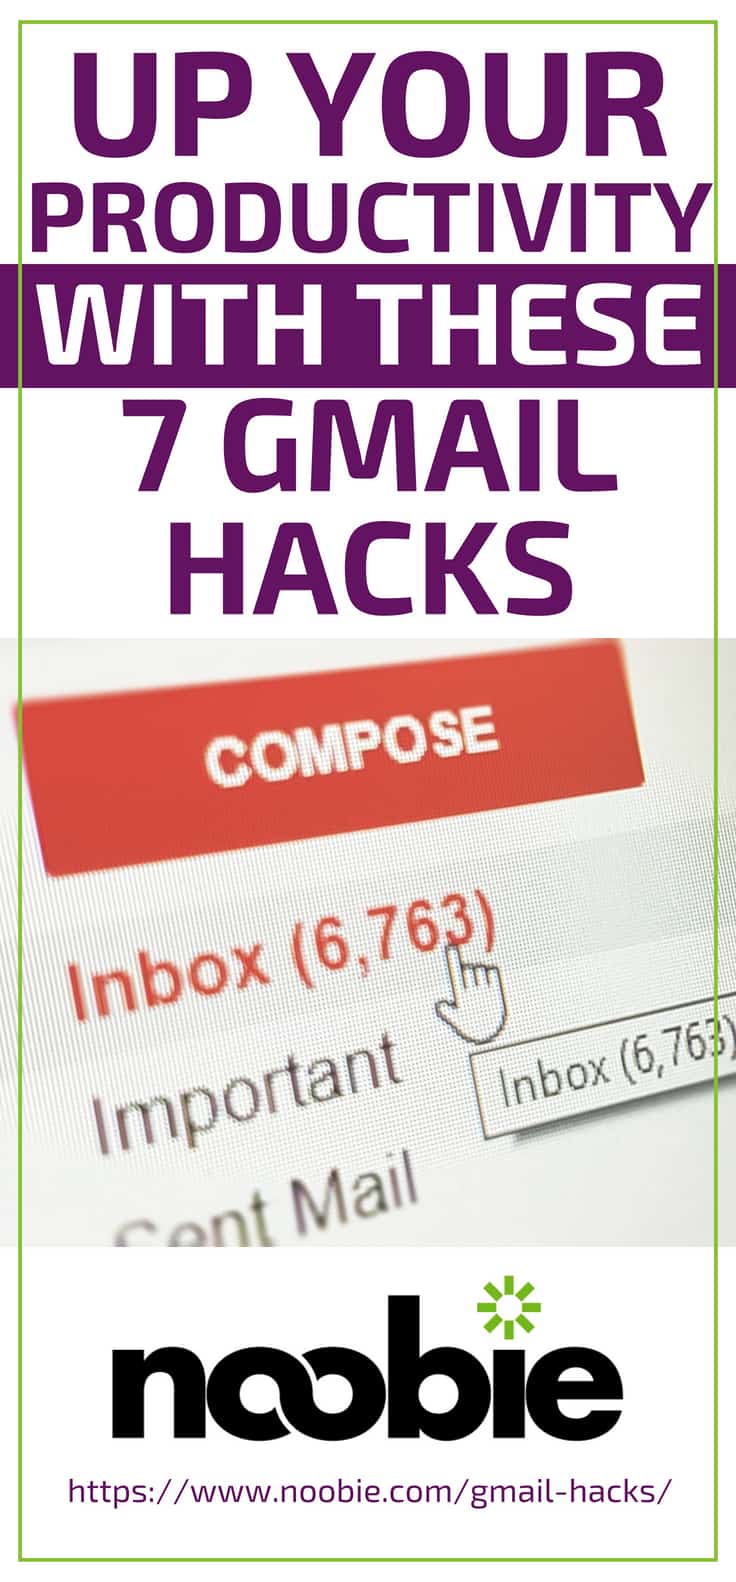 Up Your Productivity With These 7 Gmail Hacks https://noobie.com/gmail-hacks/